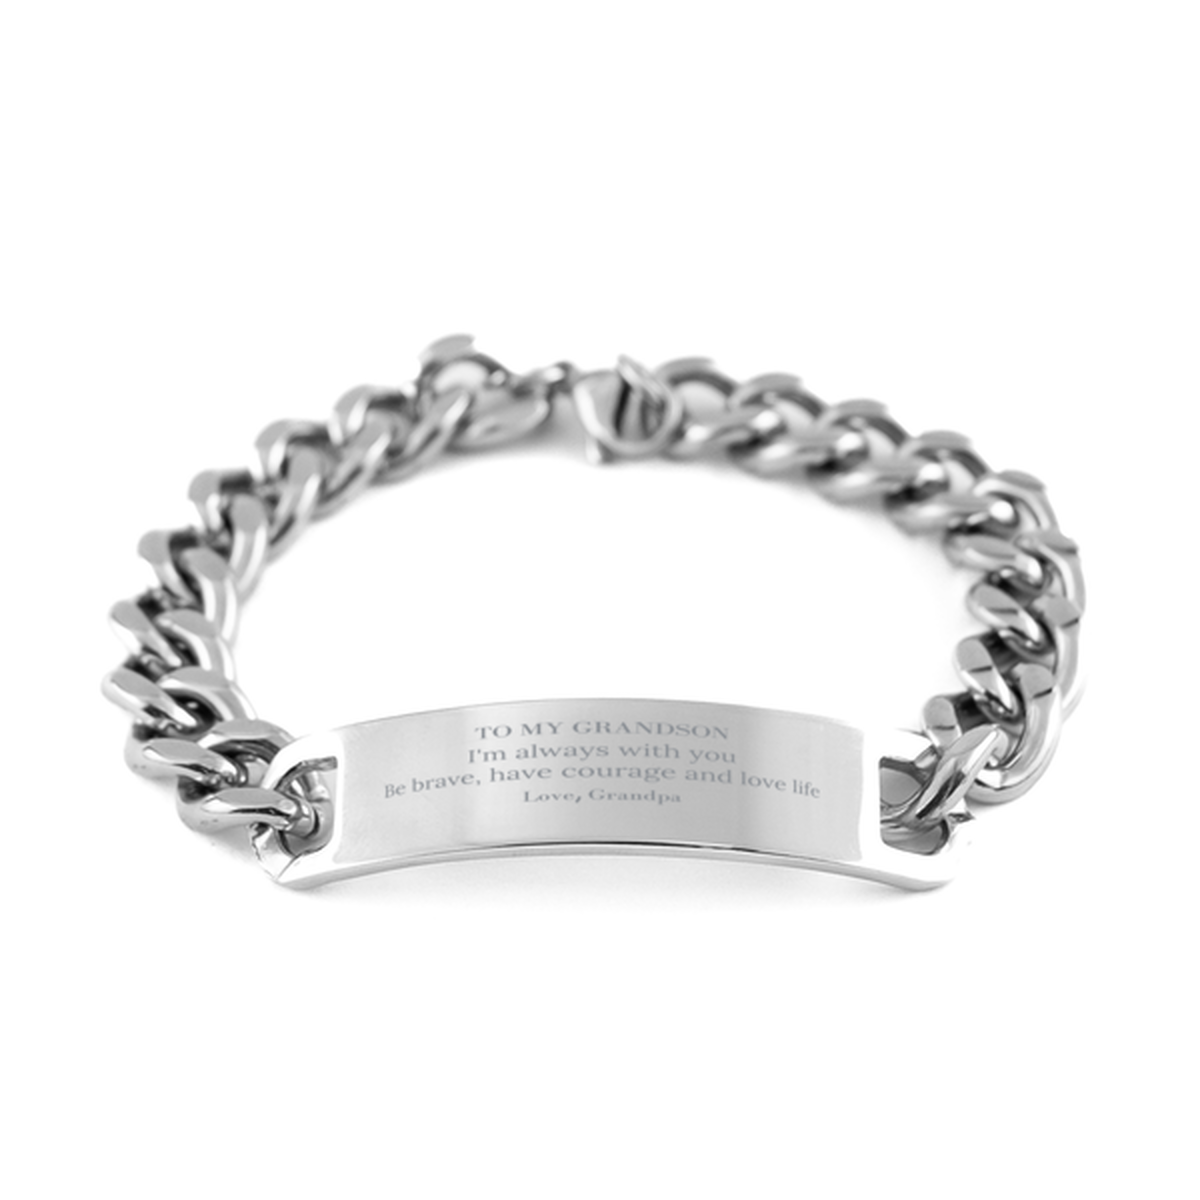 To My Grandson Gifts from Grandpa, Unique Cuban Chain Stainless Steel Bracelet Inspirational Christmas Birthday Graduation Gifts for Grandson I'm always with you. Be brave, have courage and love life. Love, Grandpa